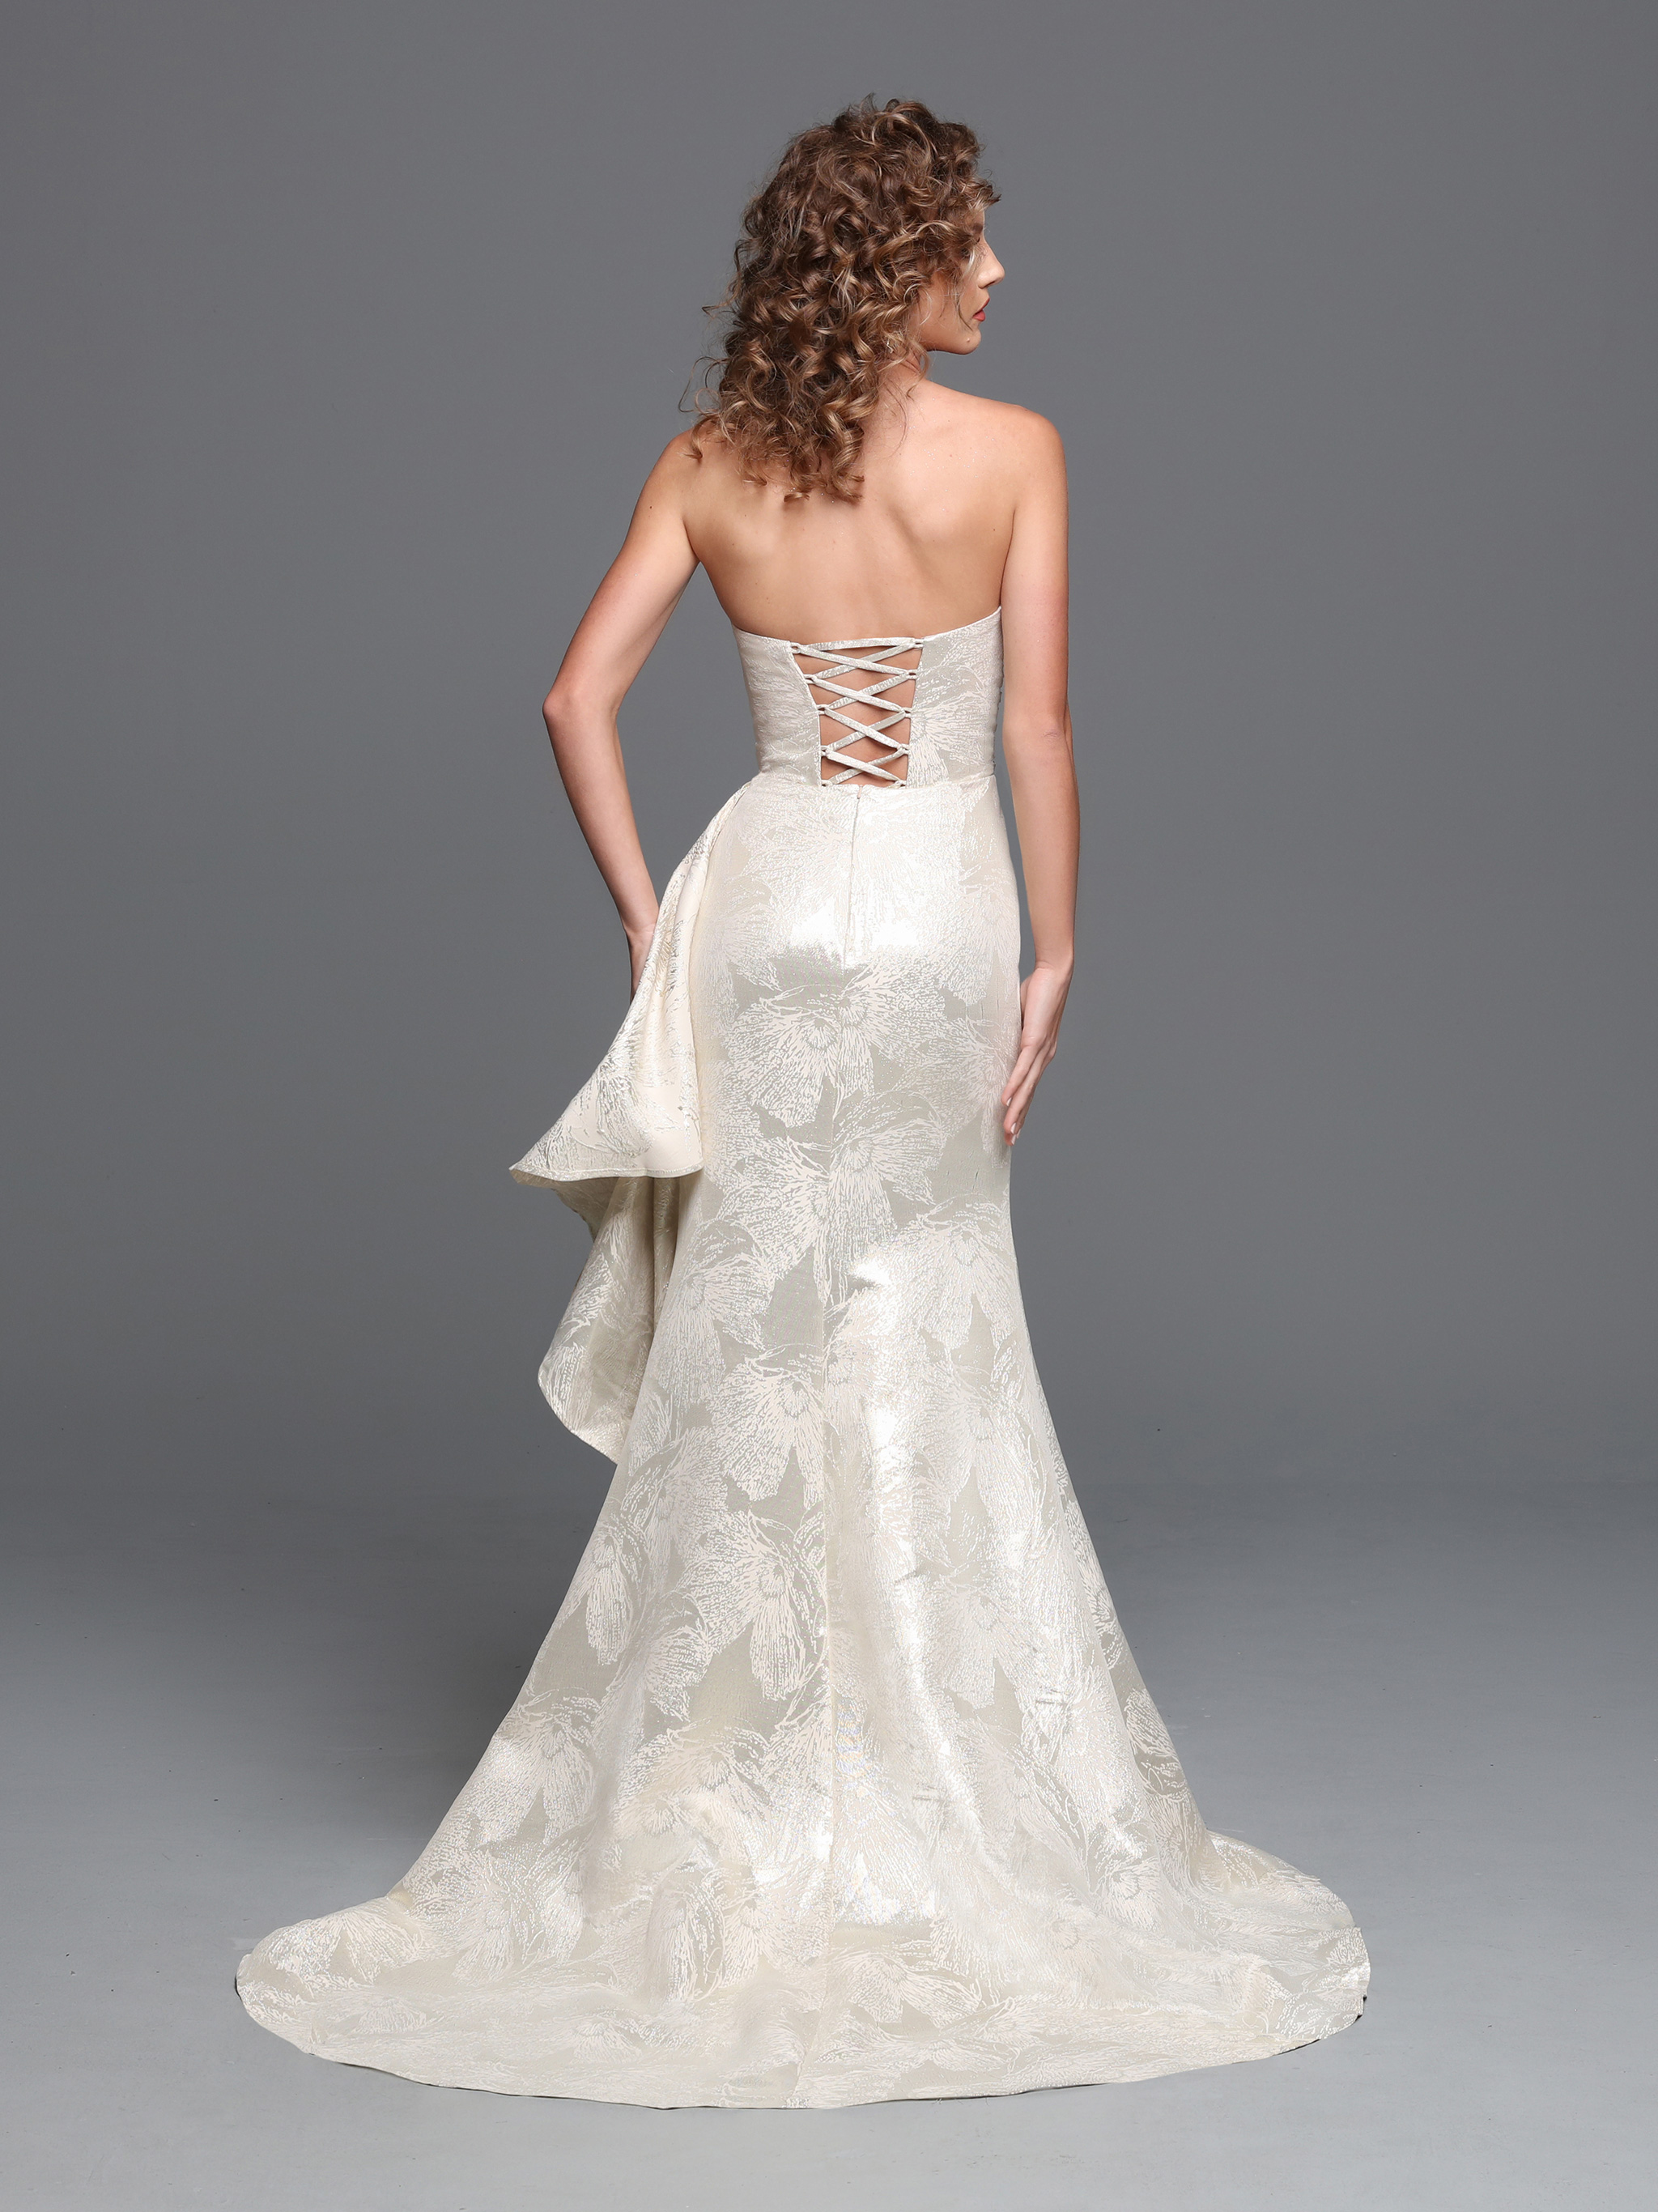 Image showing back view of style #72251